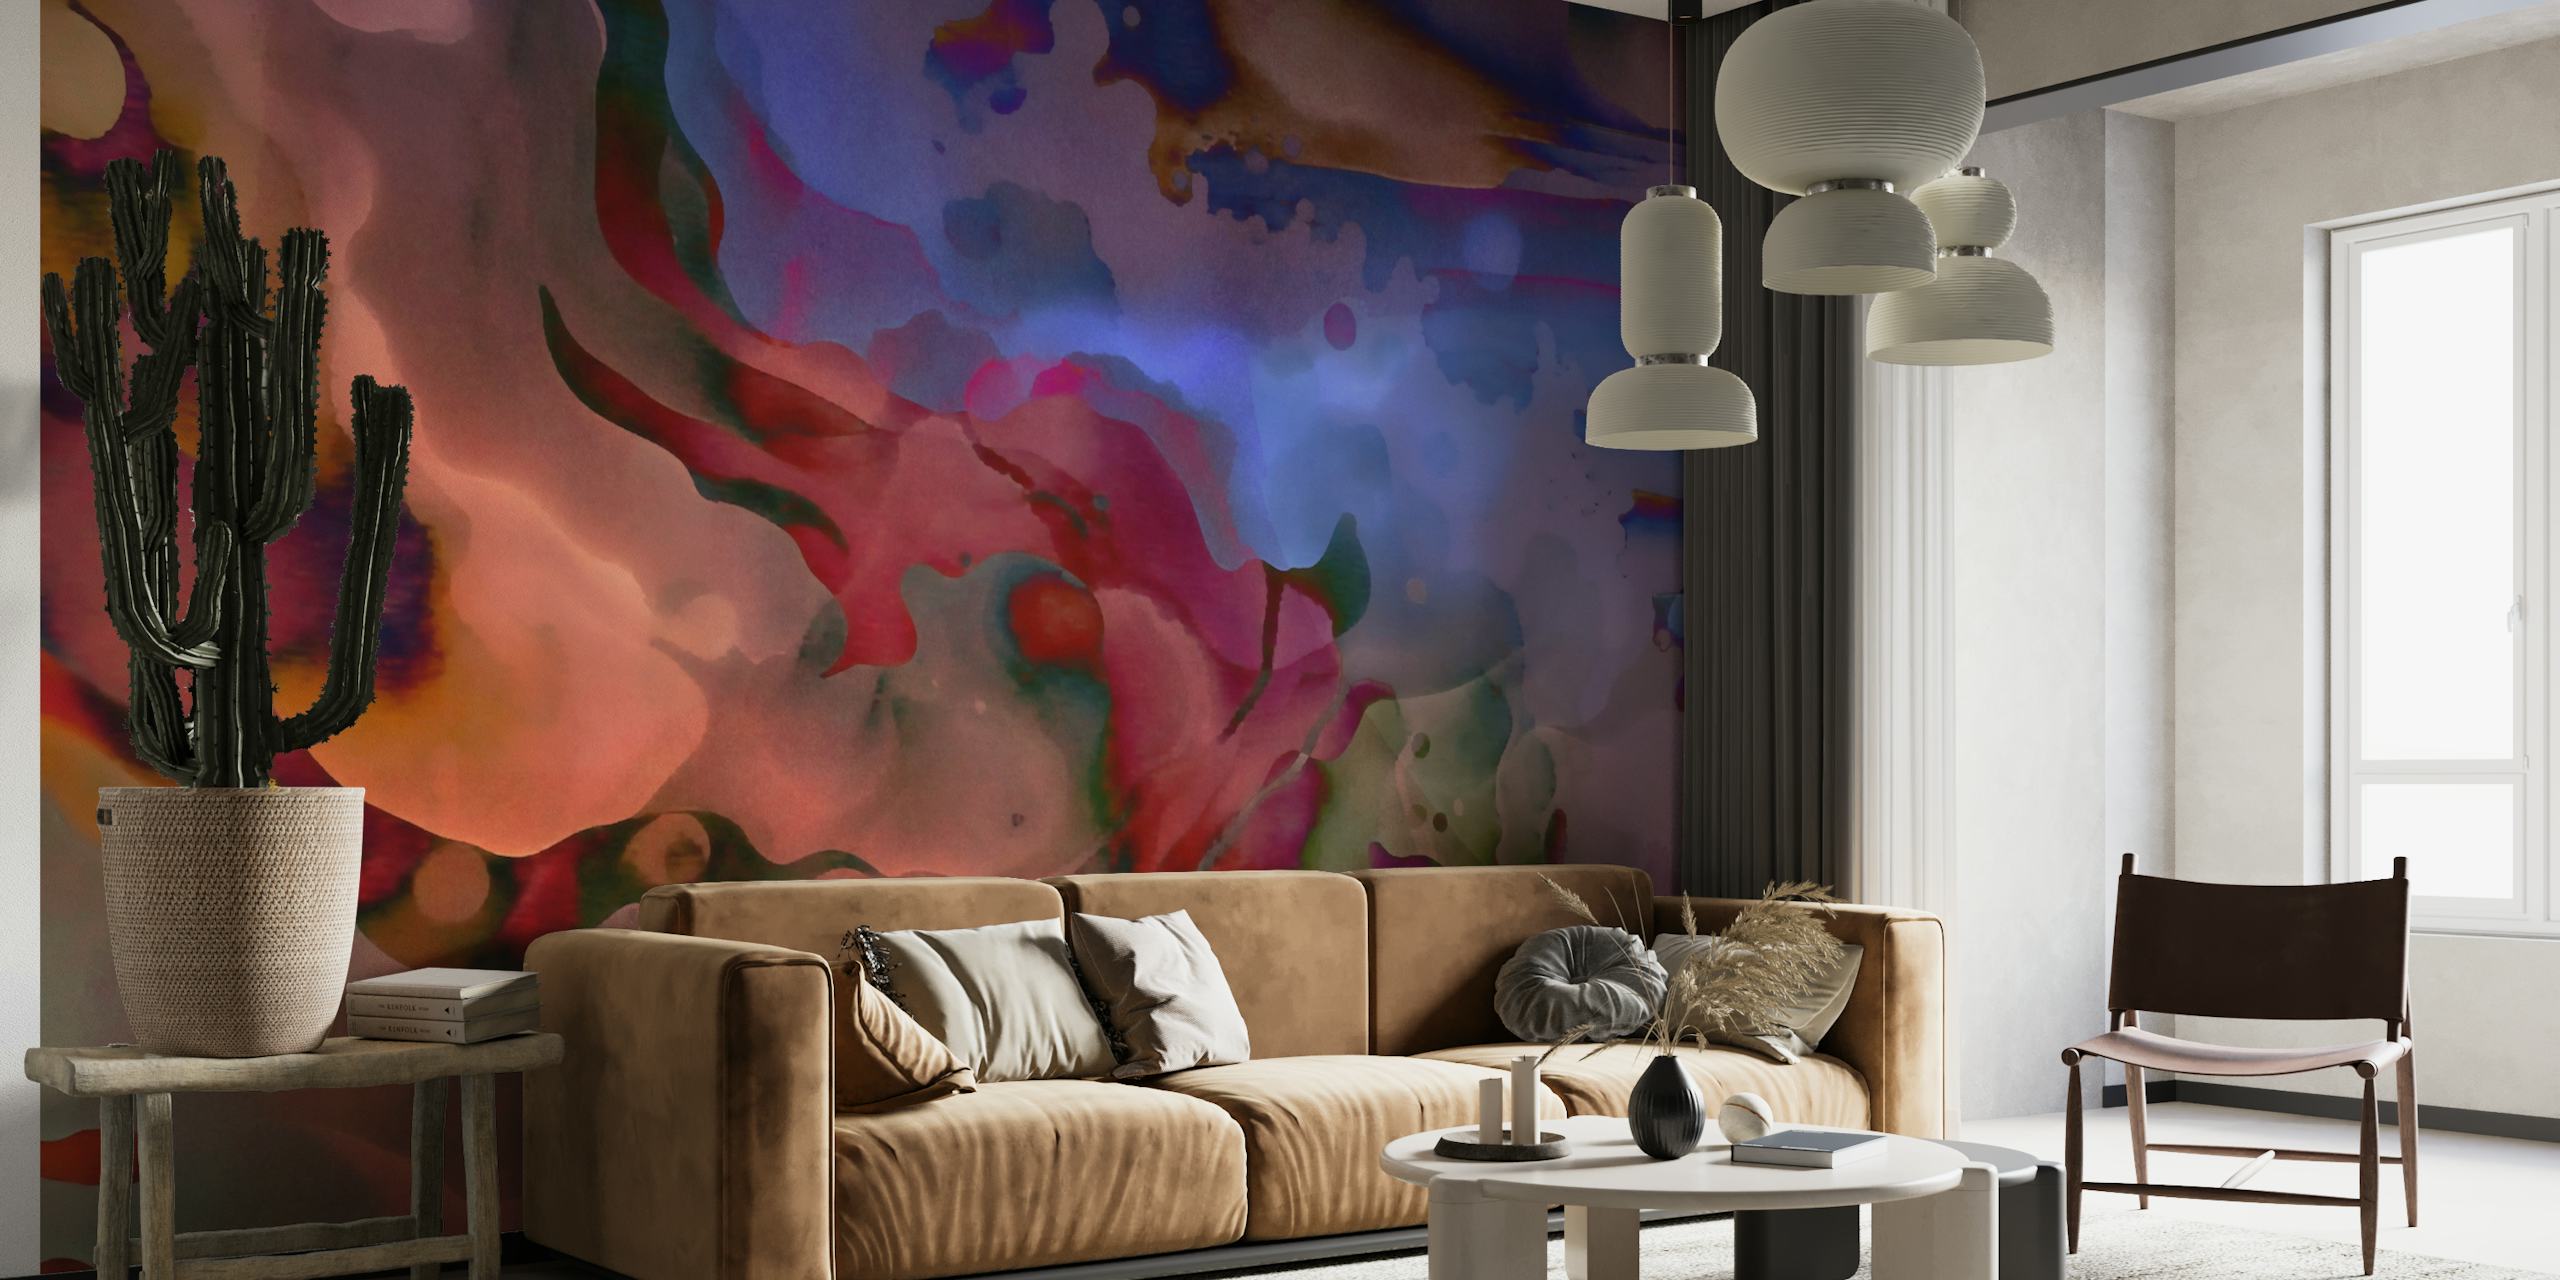 Abstract wall mural with swirls of blue, purple, and hints of warm colors, representing the ocean at night.